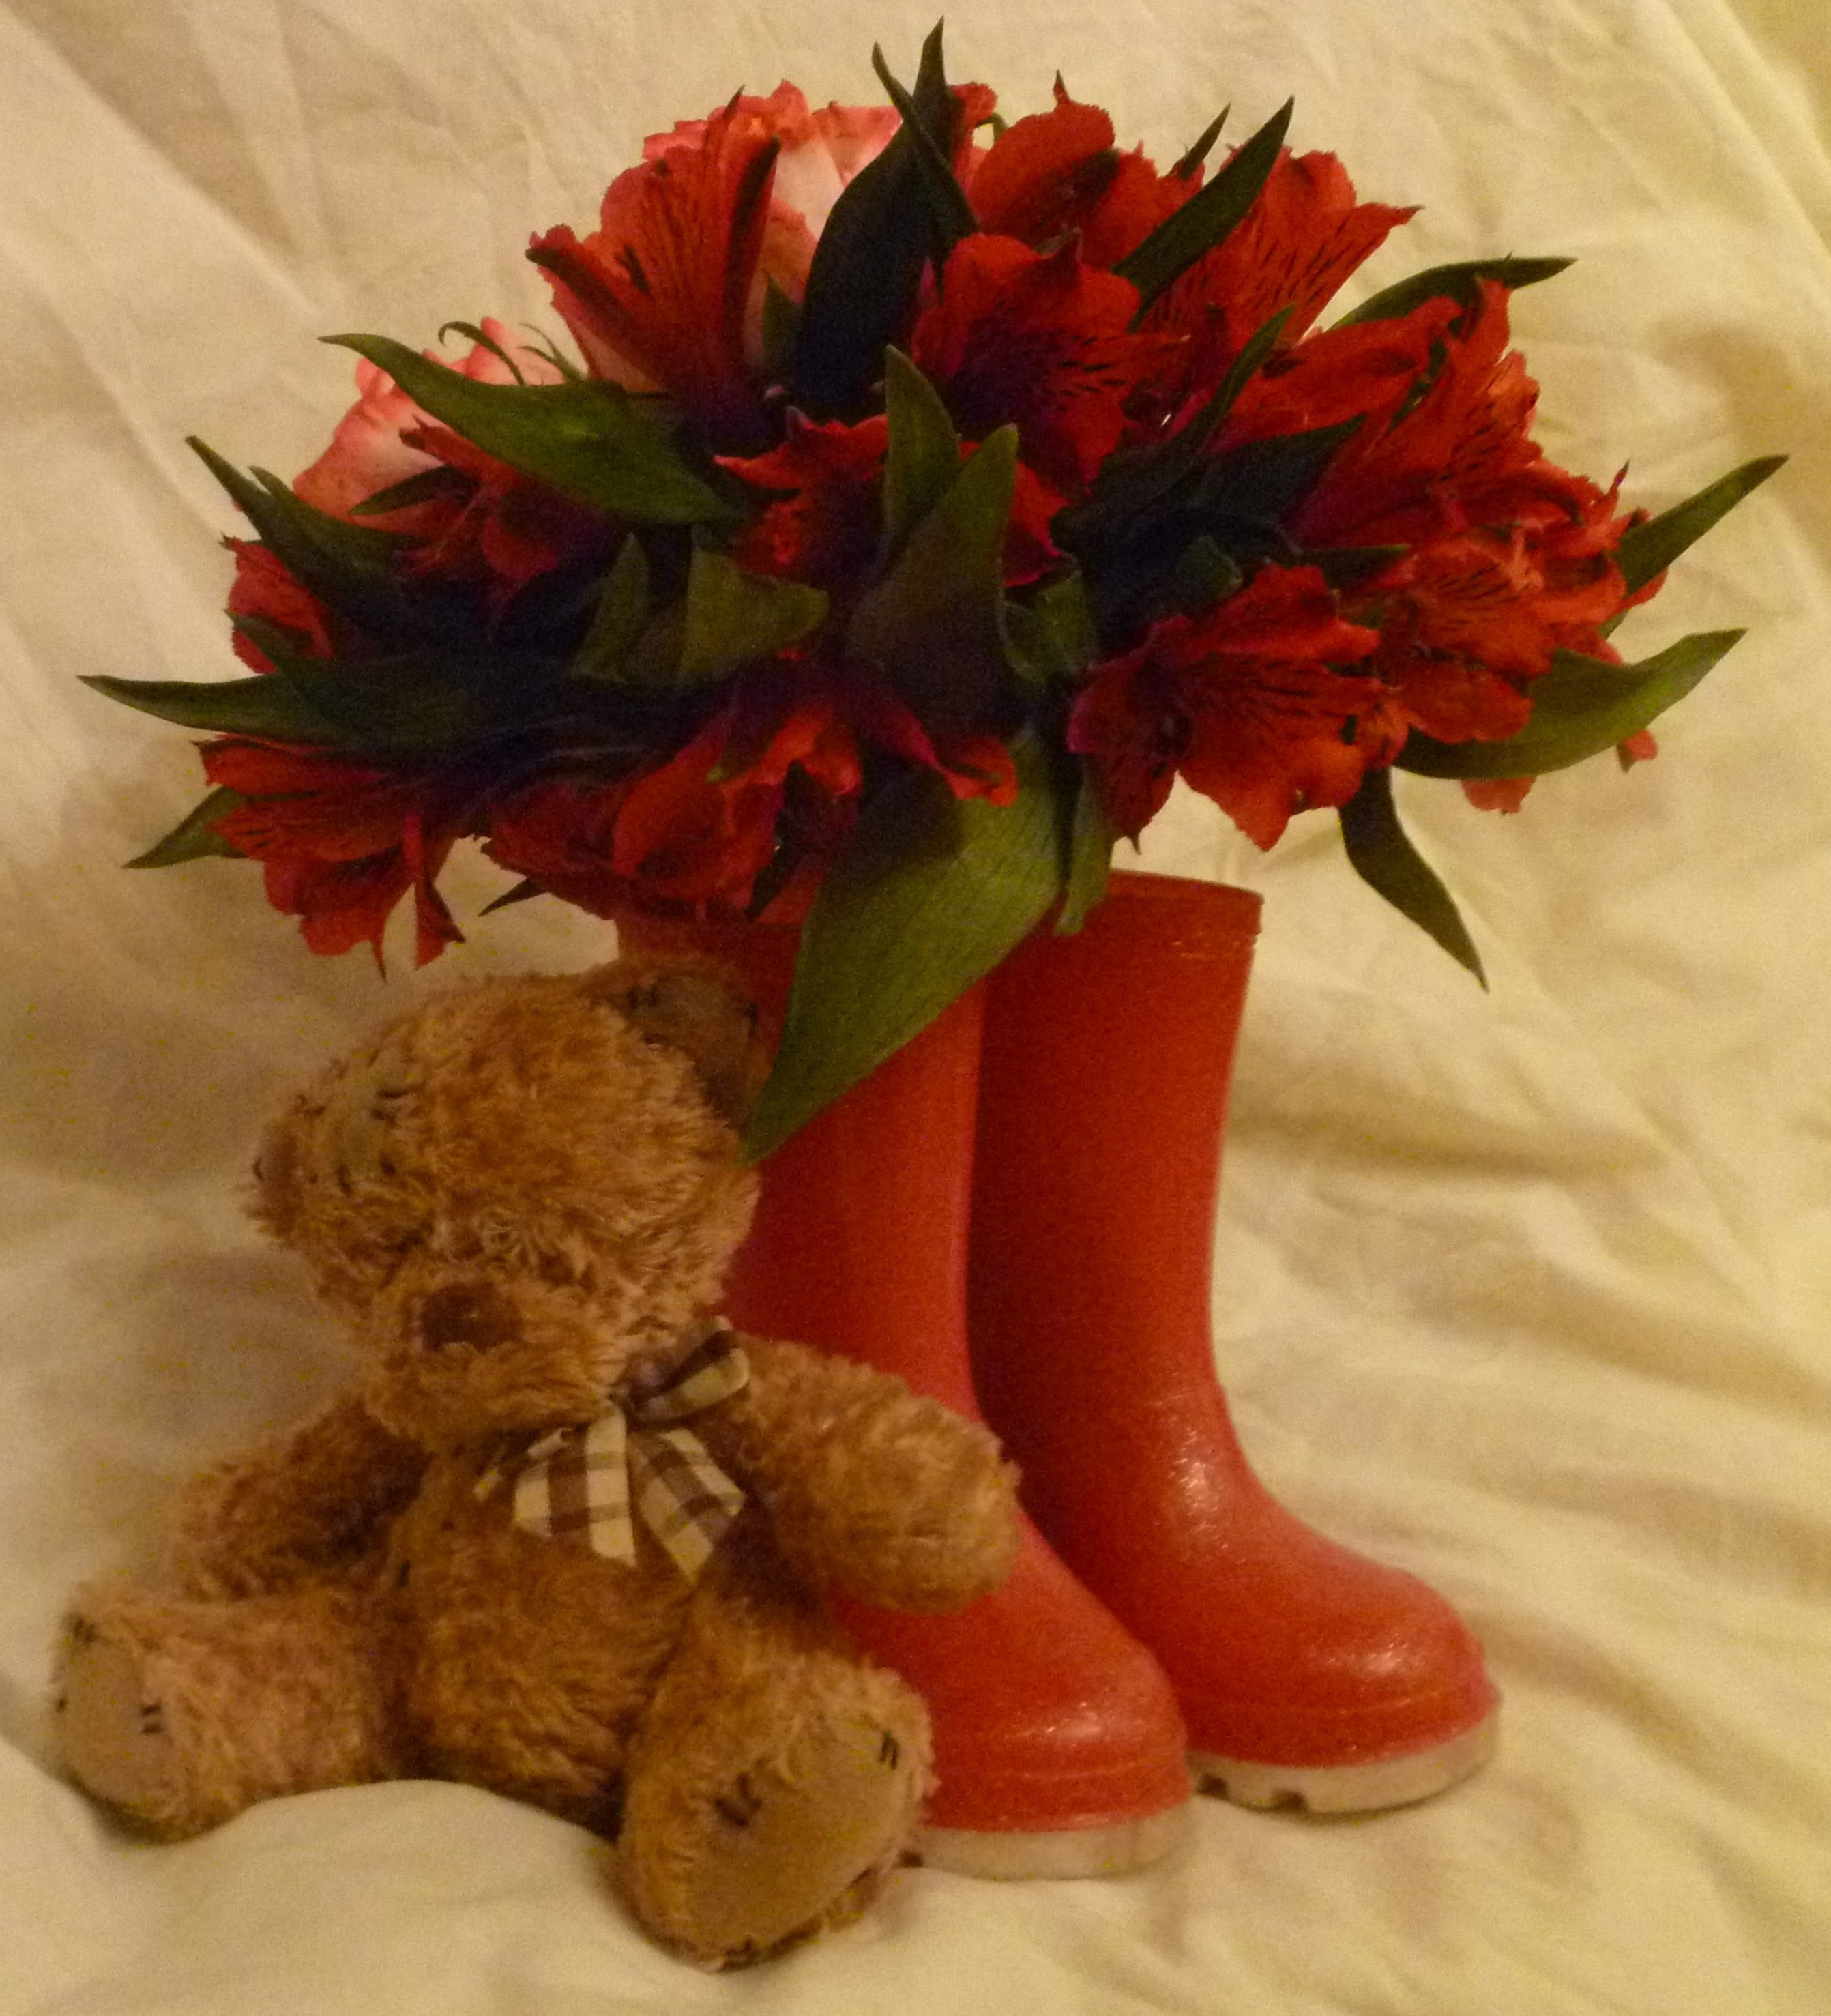 Oadby florist, Wigston florist, Leicester Contract flowers in boots with a teddy bear